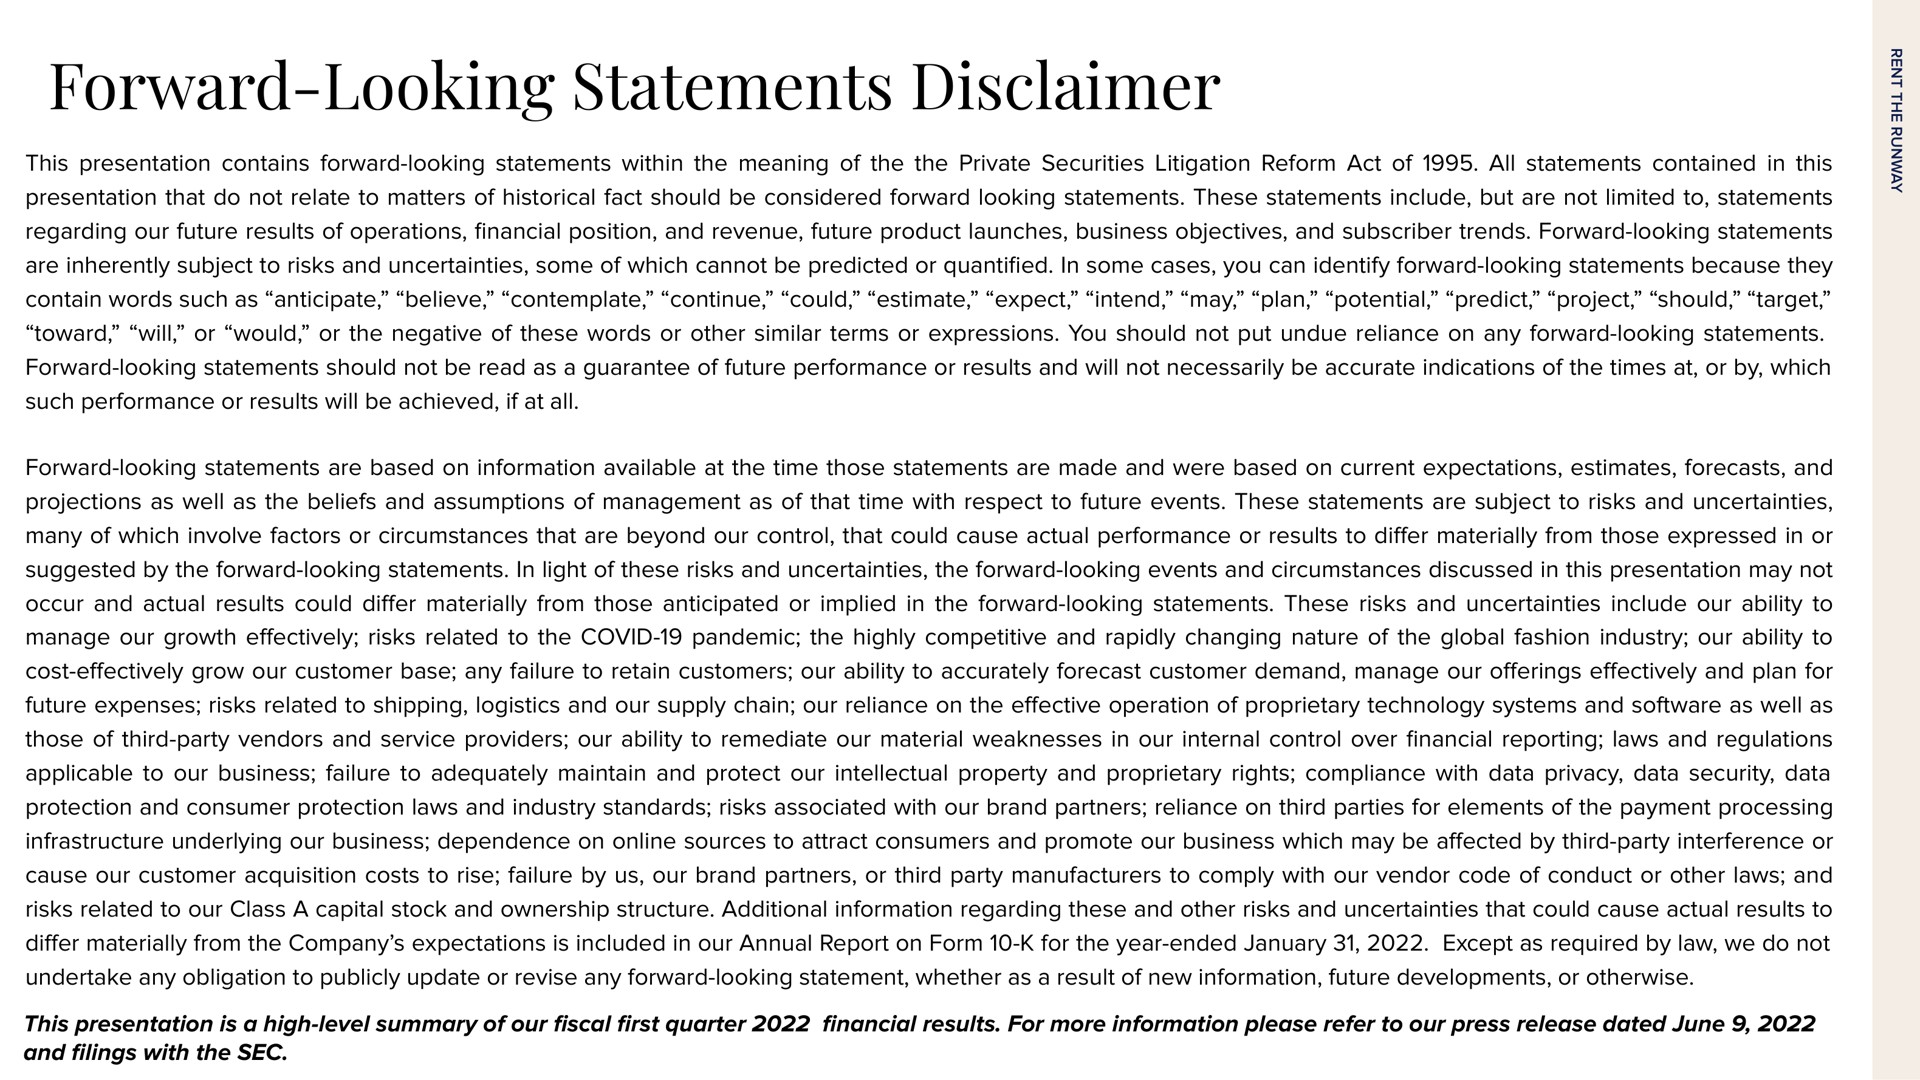 forward looking statements disclaimer | Rent The Runway